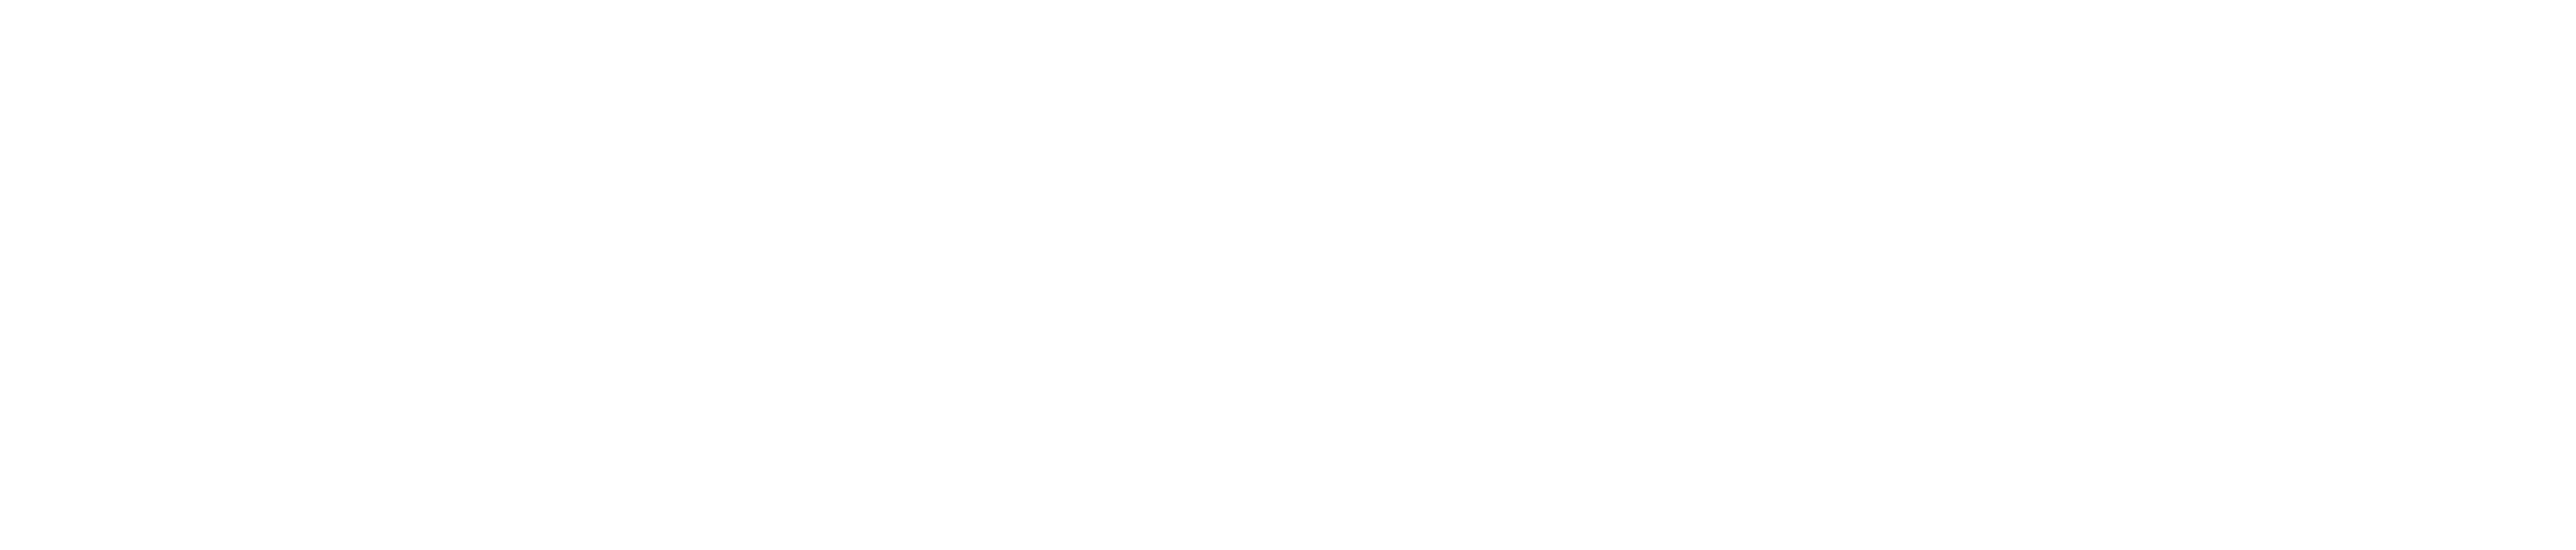 Northwest Fund for the Environment